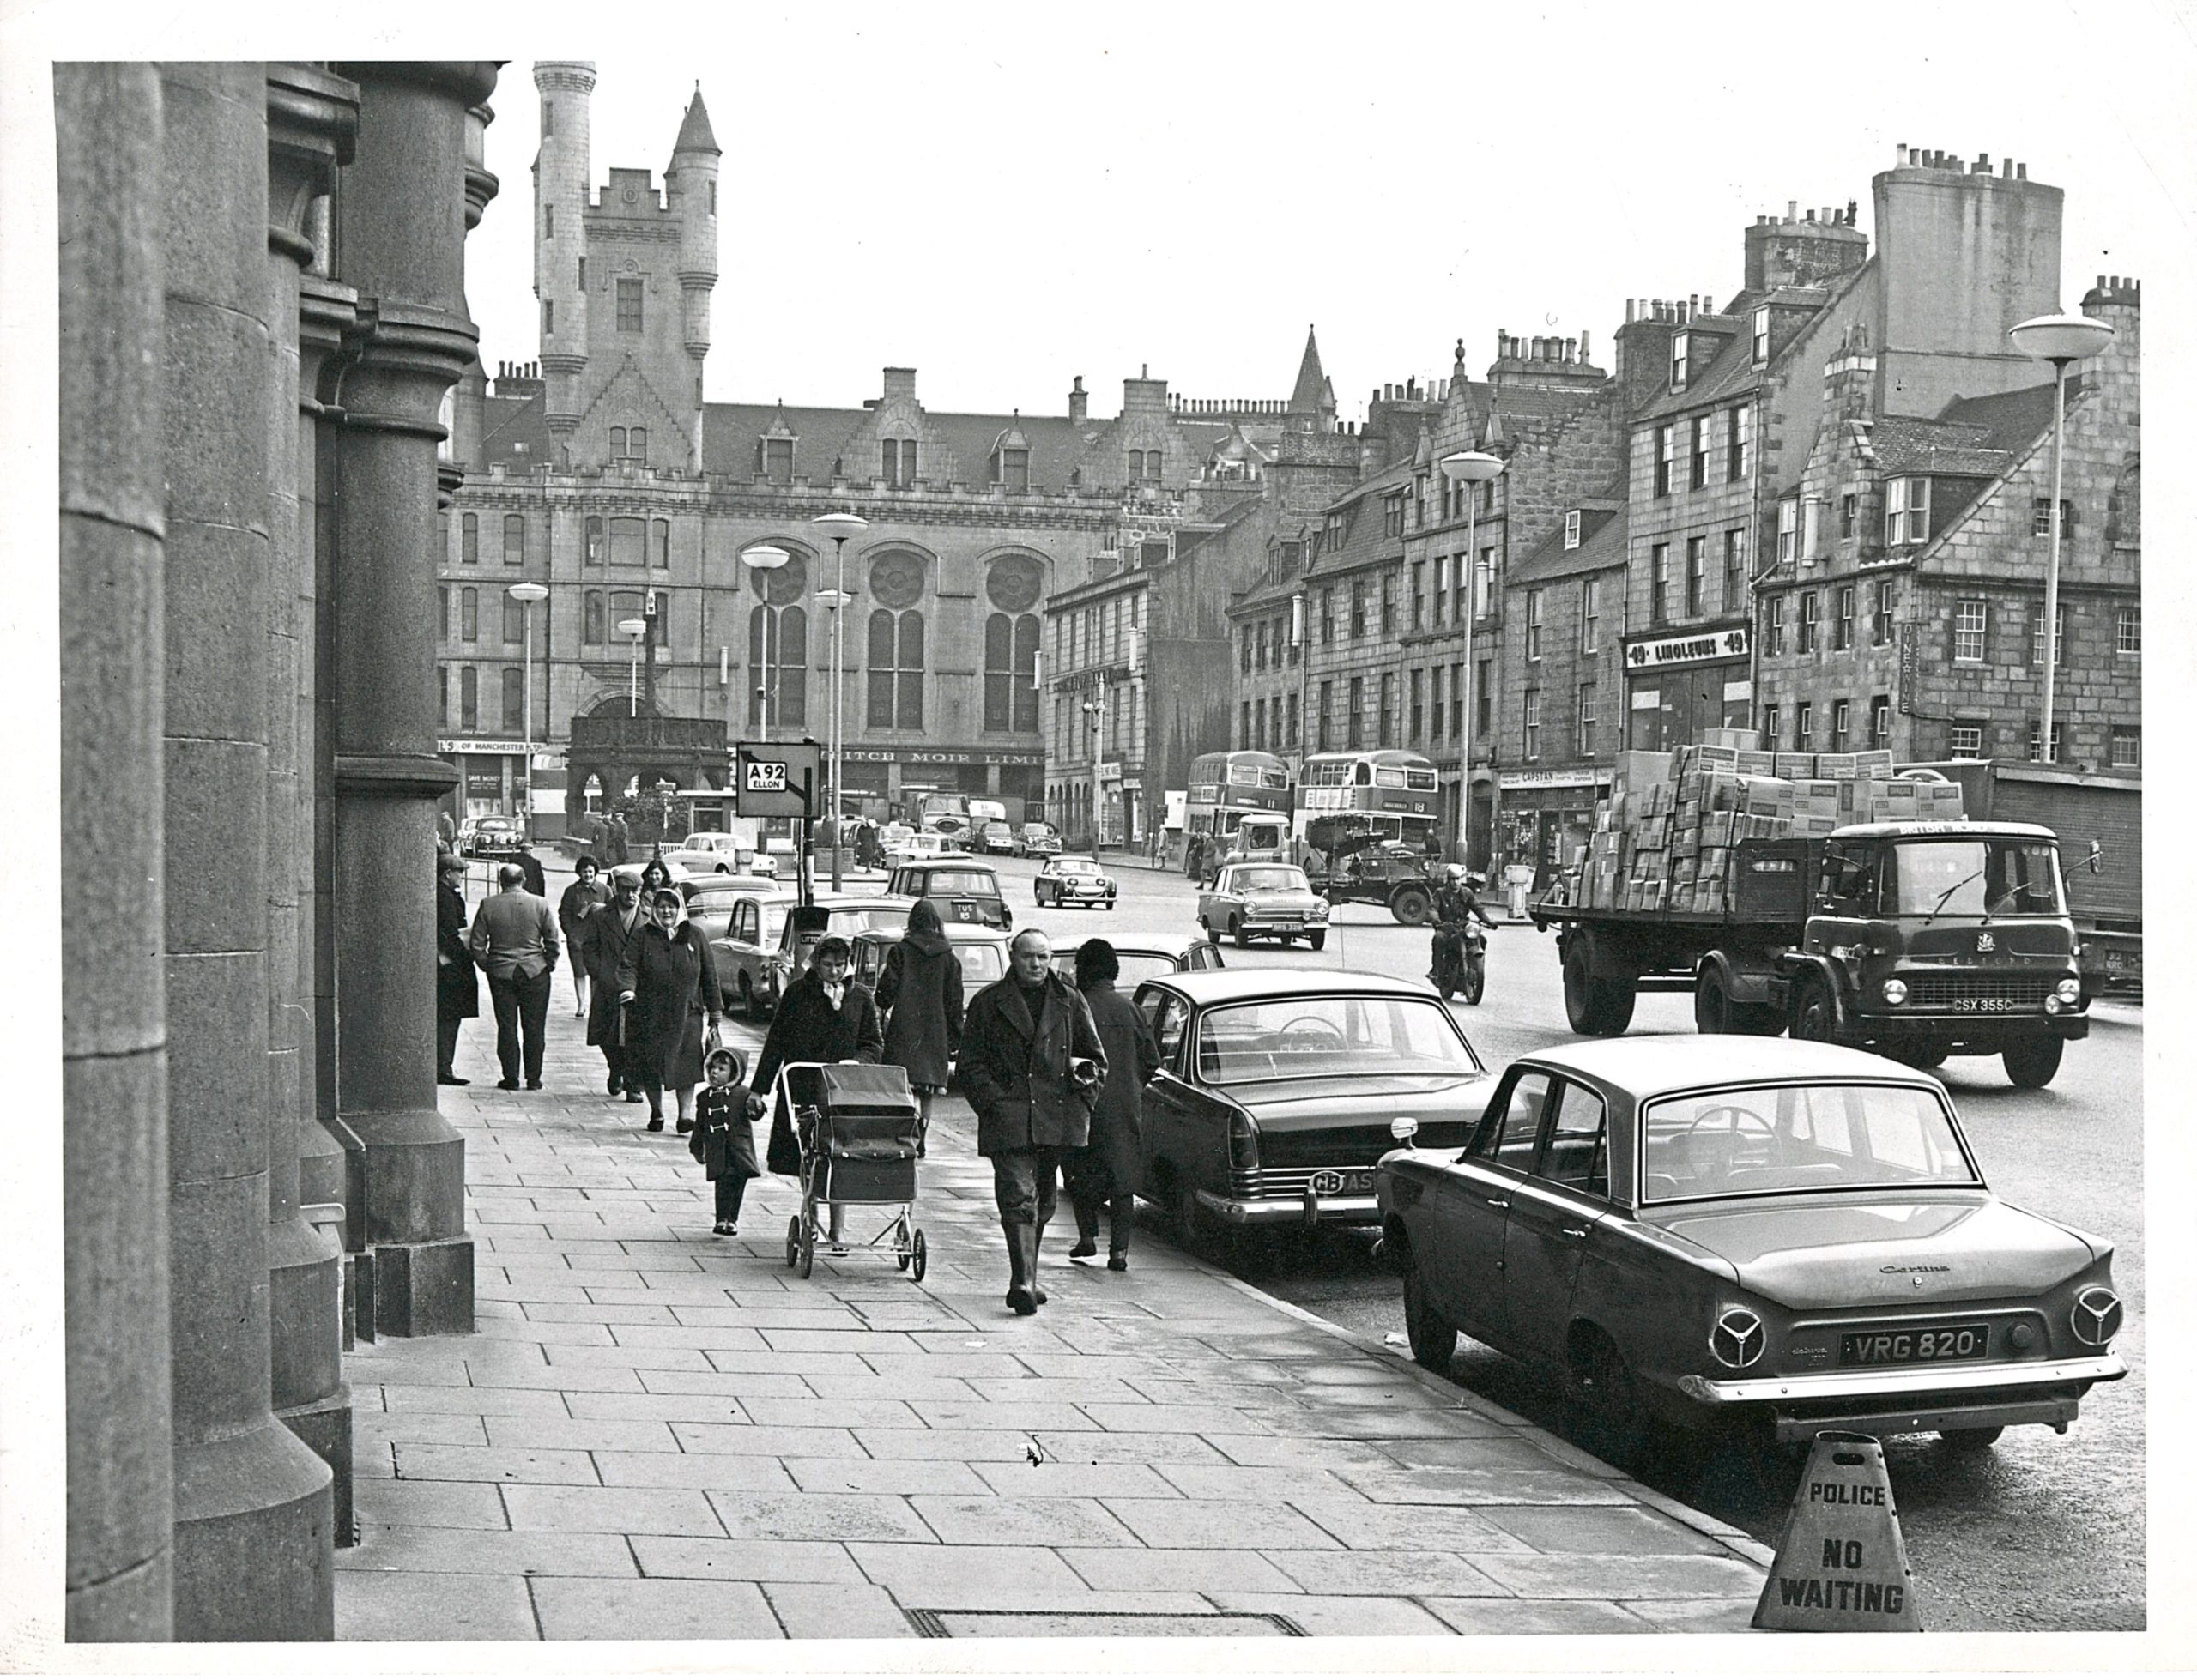 View of Castlegate from Union Street in 1966.